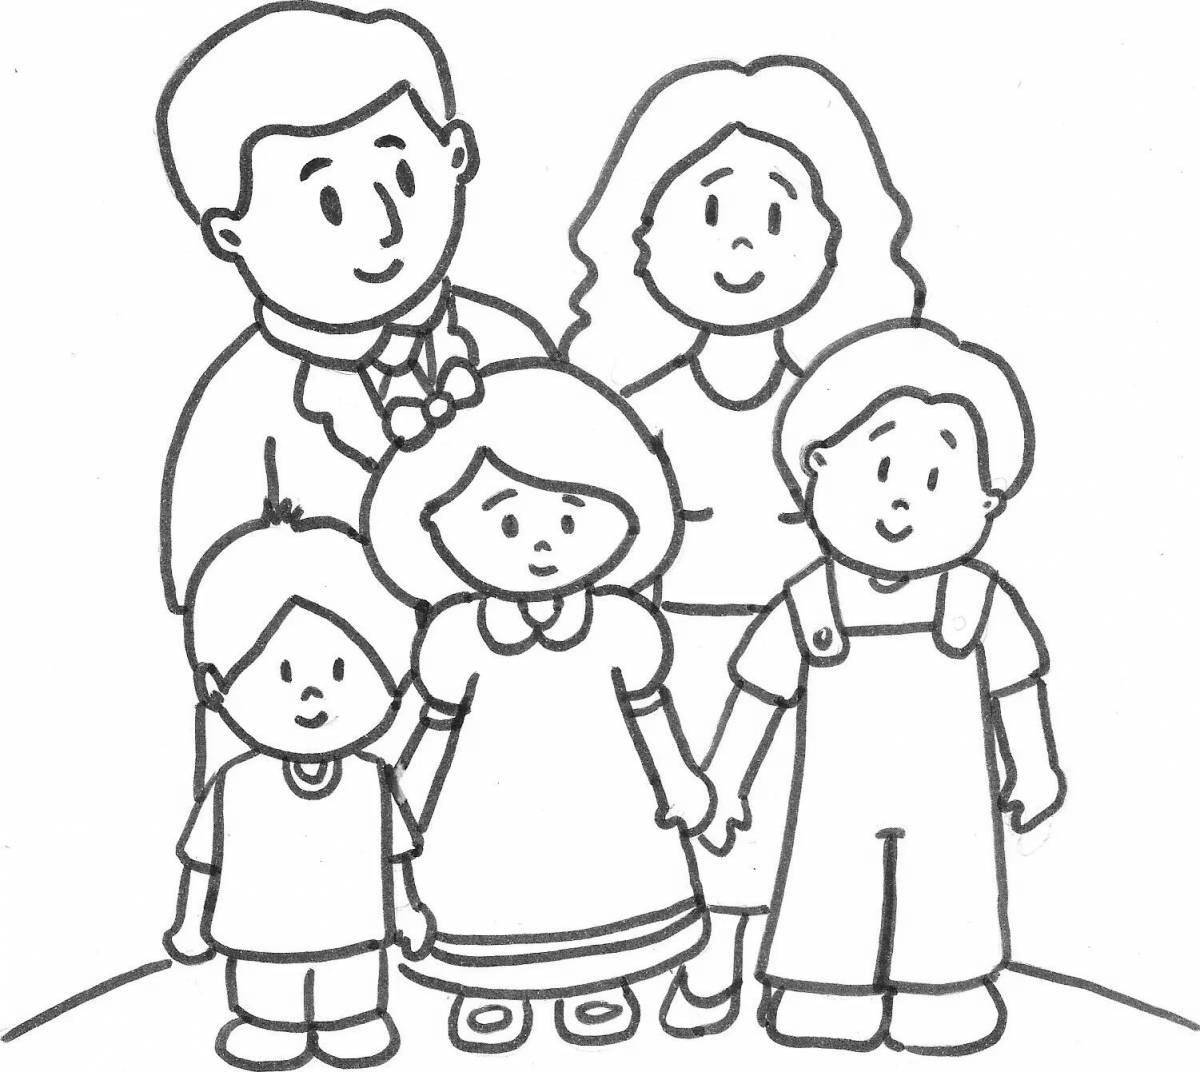 Colorful family coloring book for 3-4 year olds